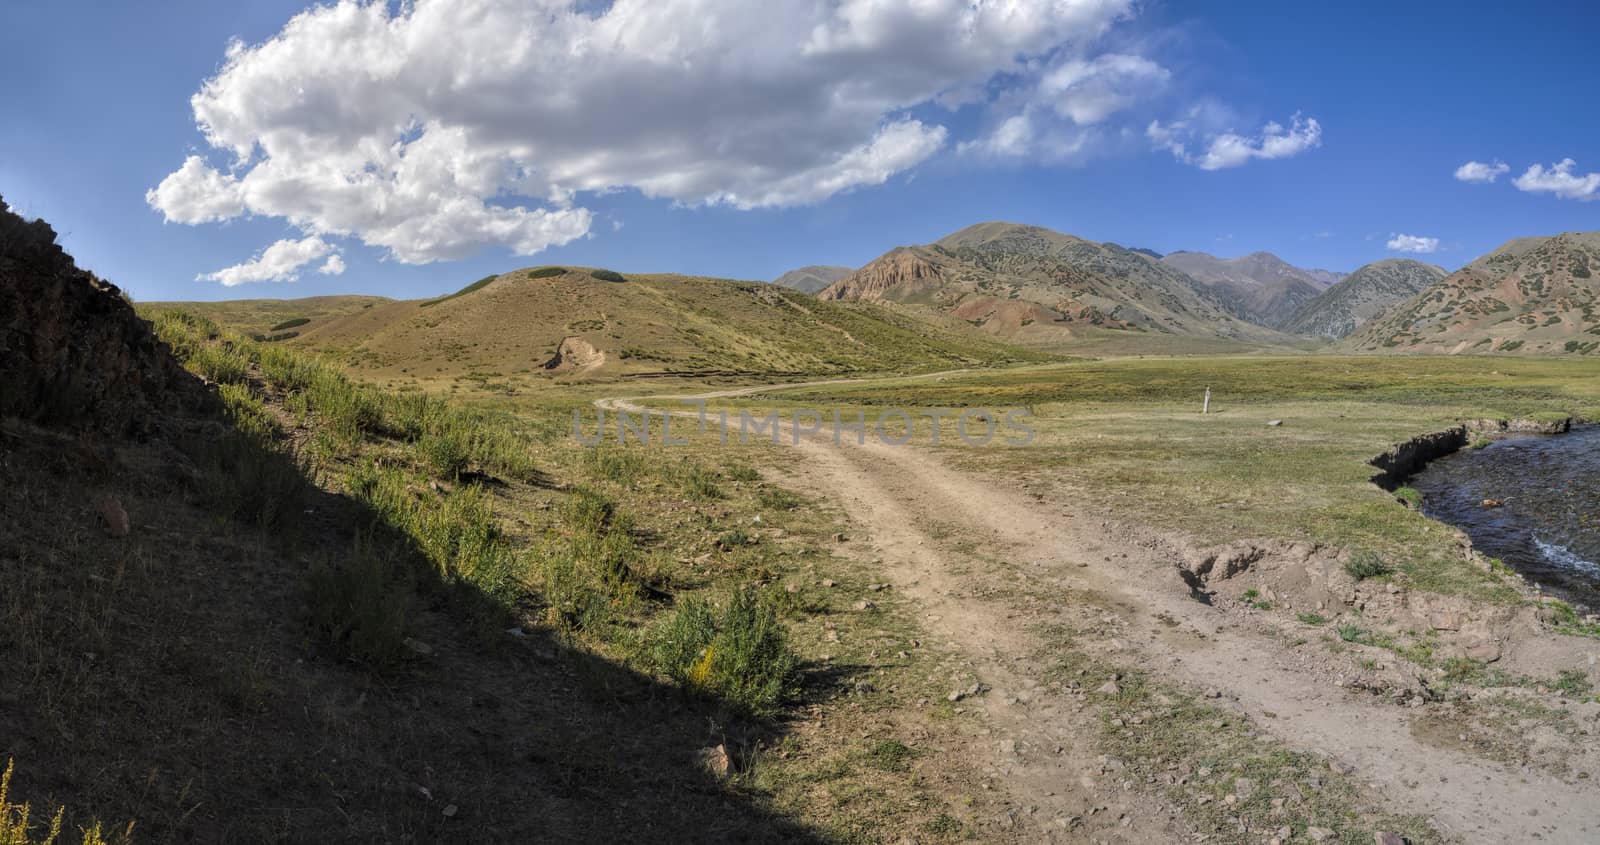 Road to Ala Archa national park in Tian Shan mountain range in Kyrgyzstan